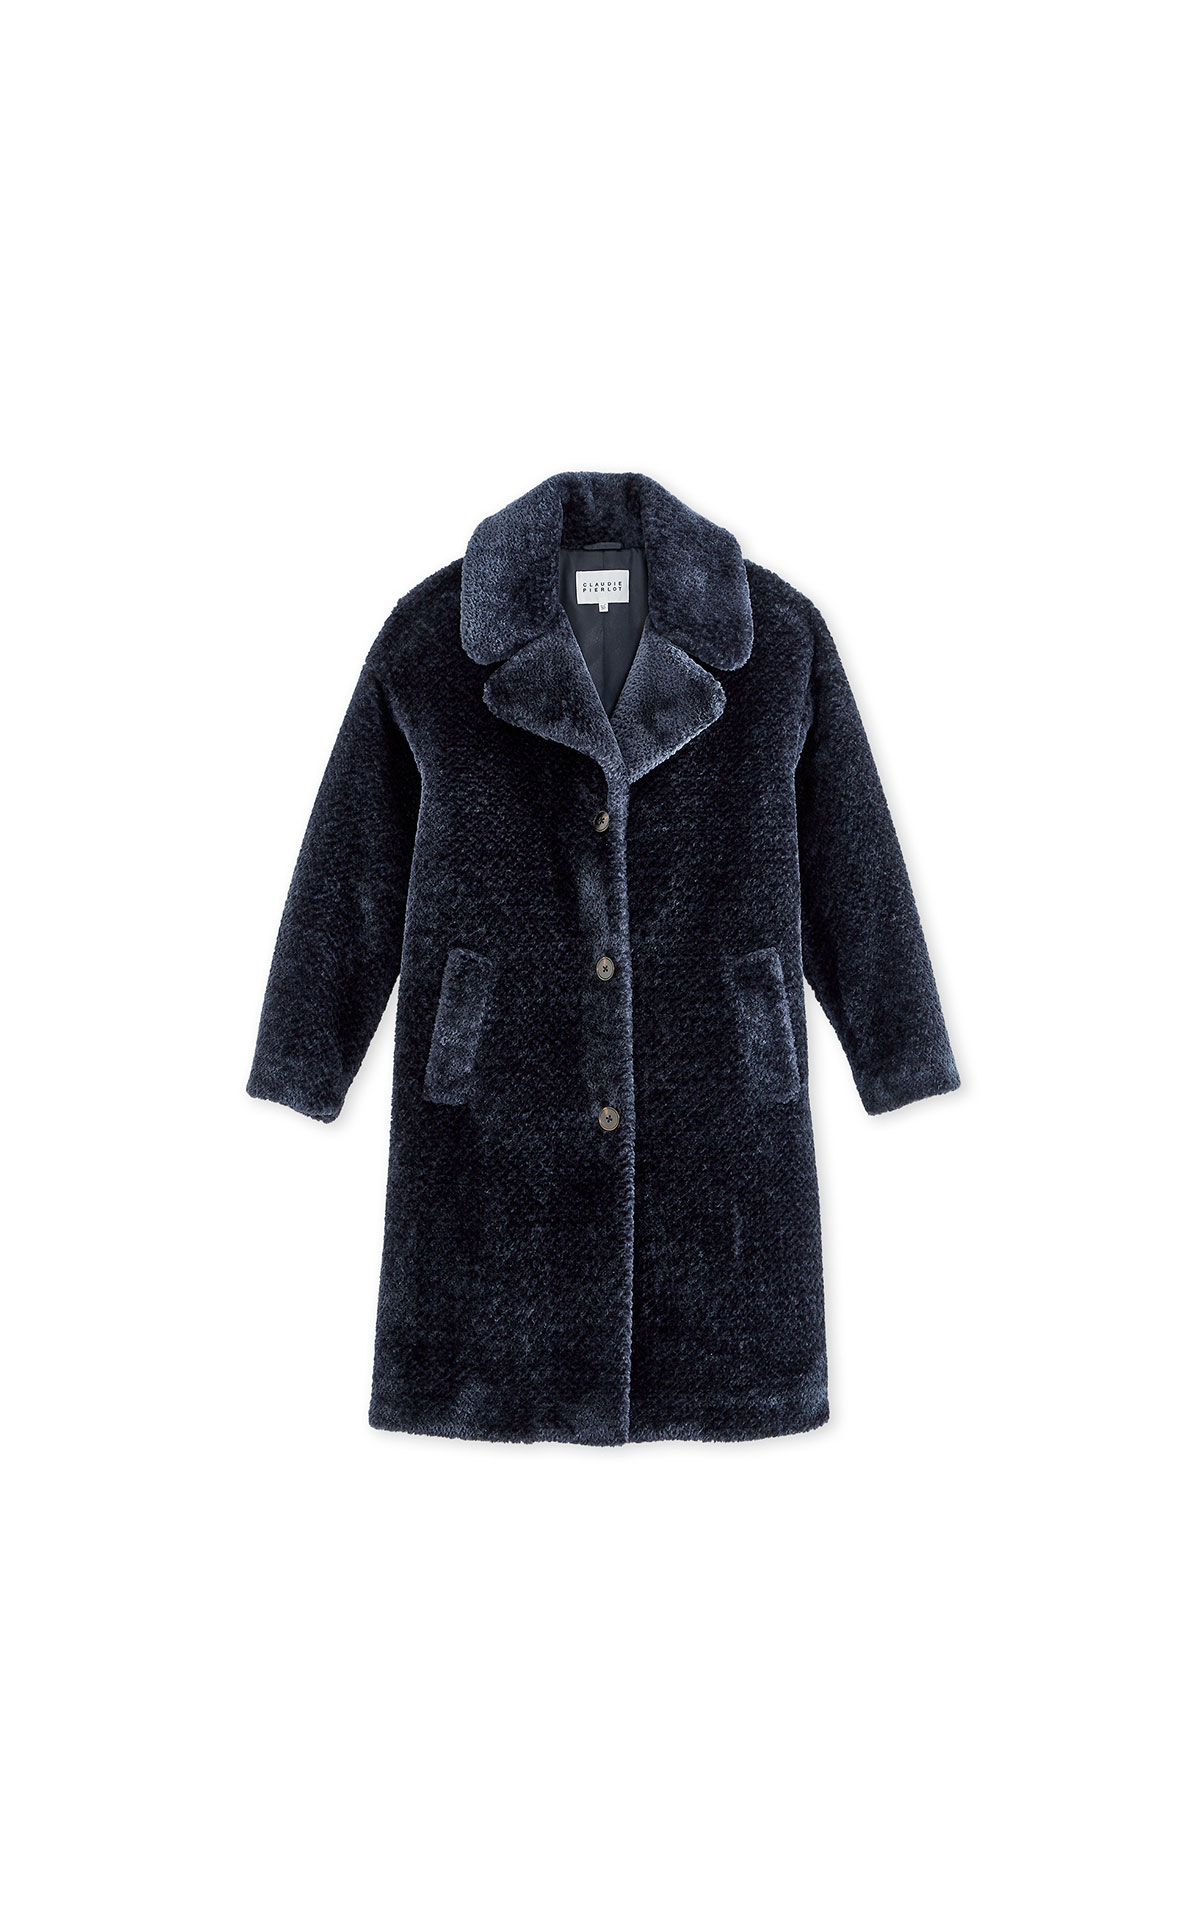 Claudie Pierlot Mid length coat from Bicester Village